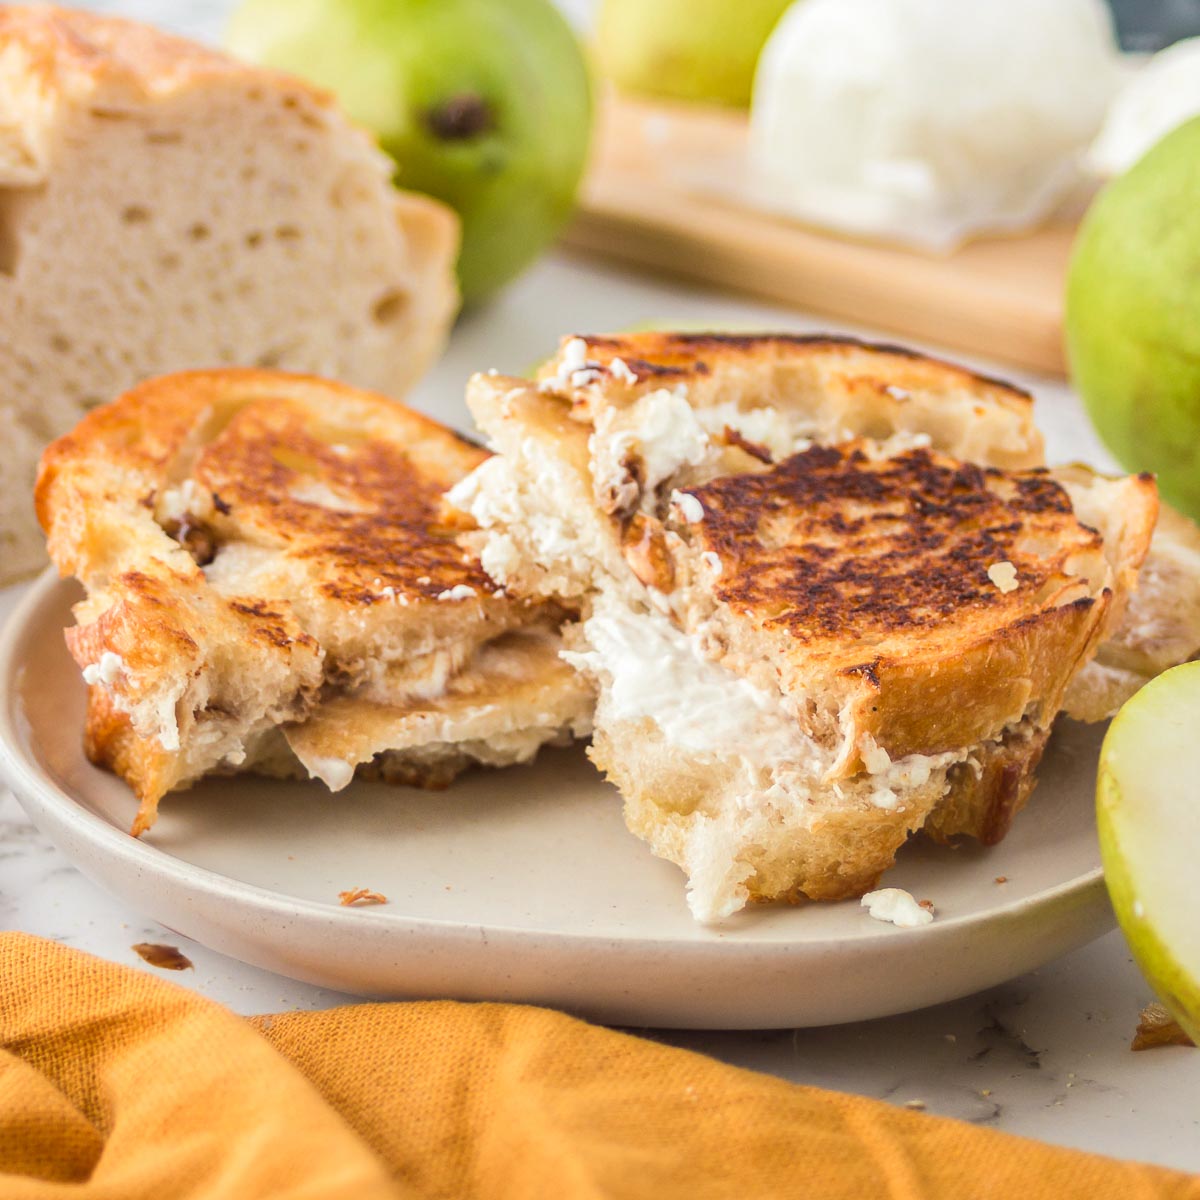 Pear and goat cheese grilled cheese sandwich on a plate.